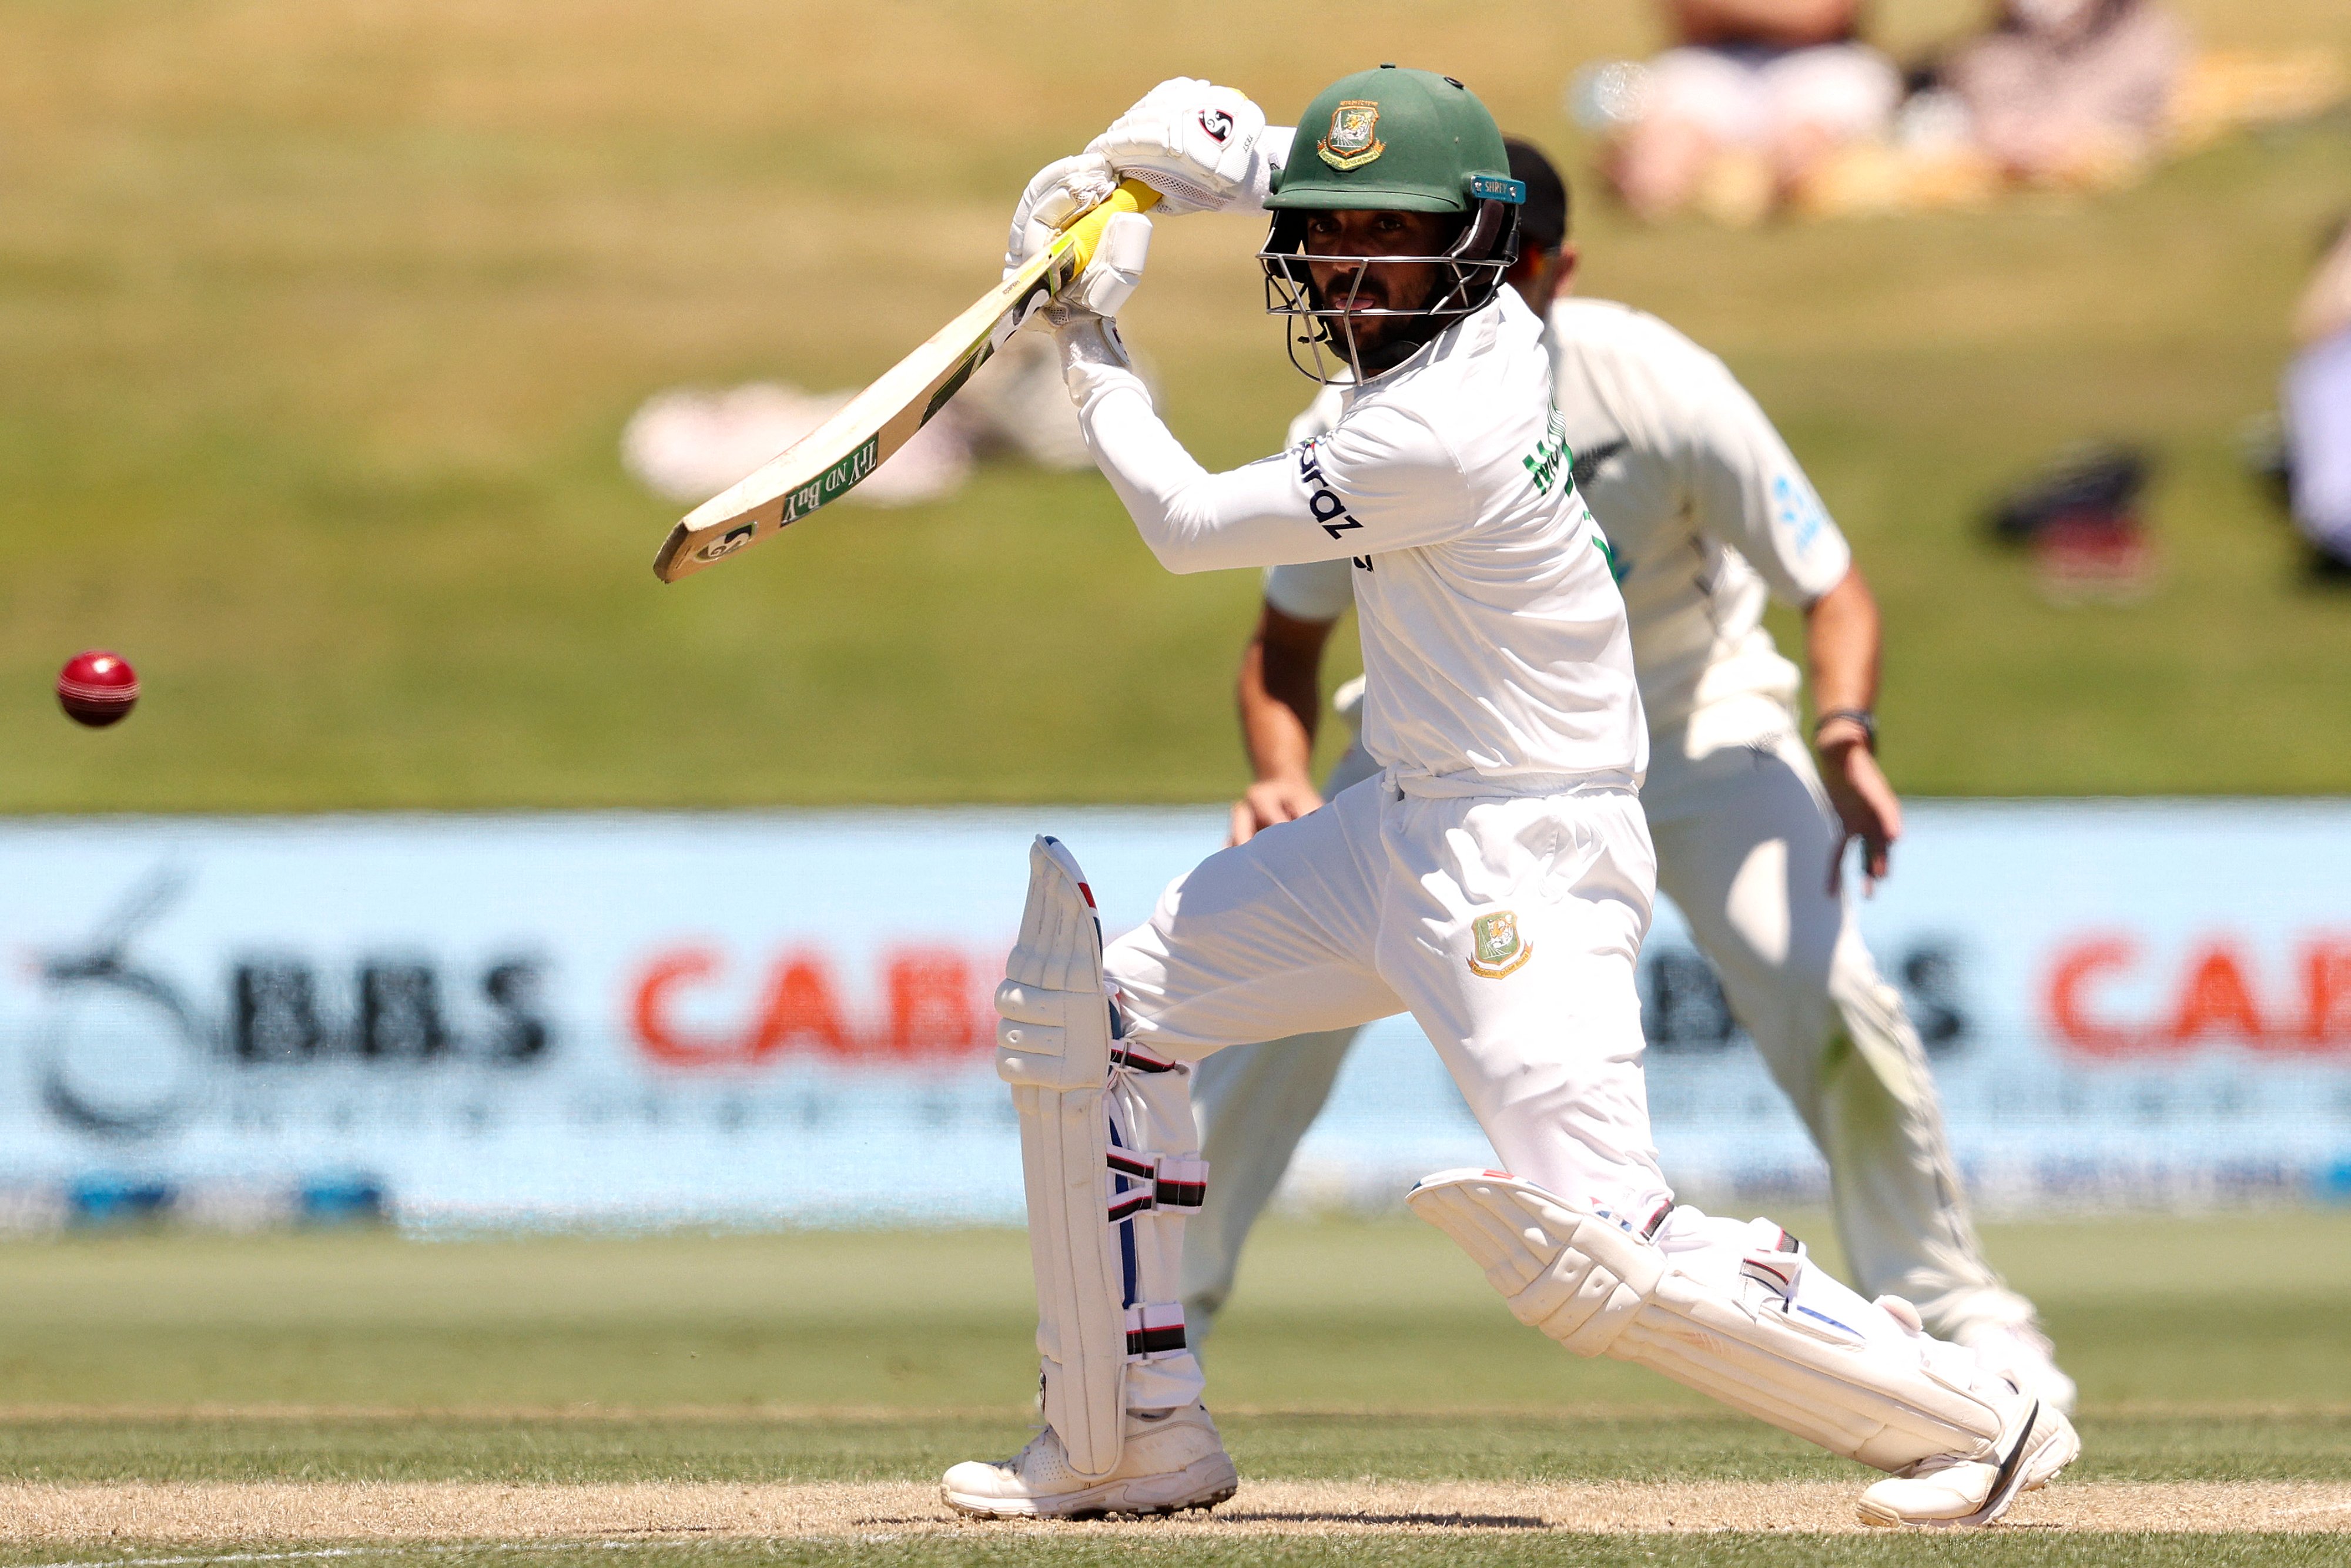 BAN vs NZ | Needed this win to keep the legacy of Test cricket alive in Bangladesh, says Mominul Haque after victory over New Zealand